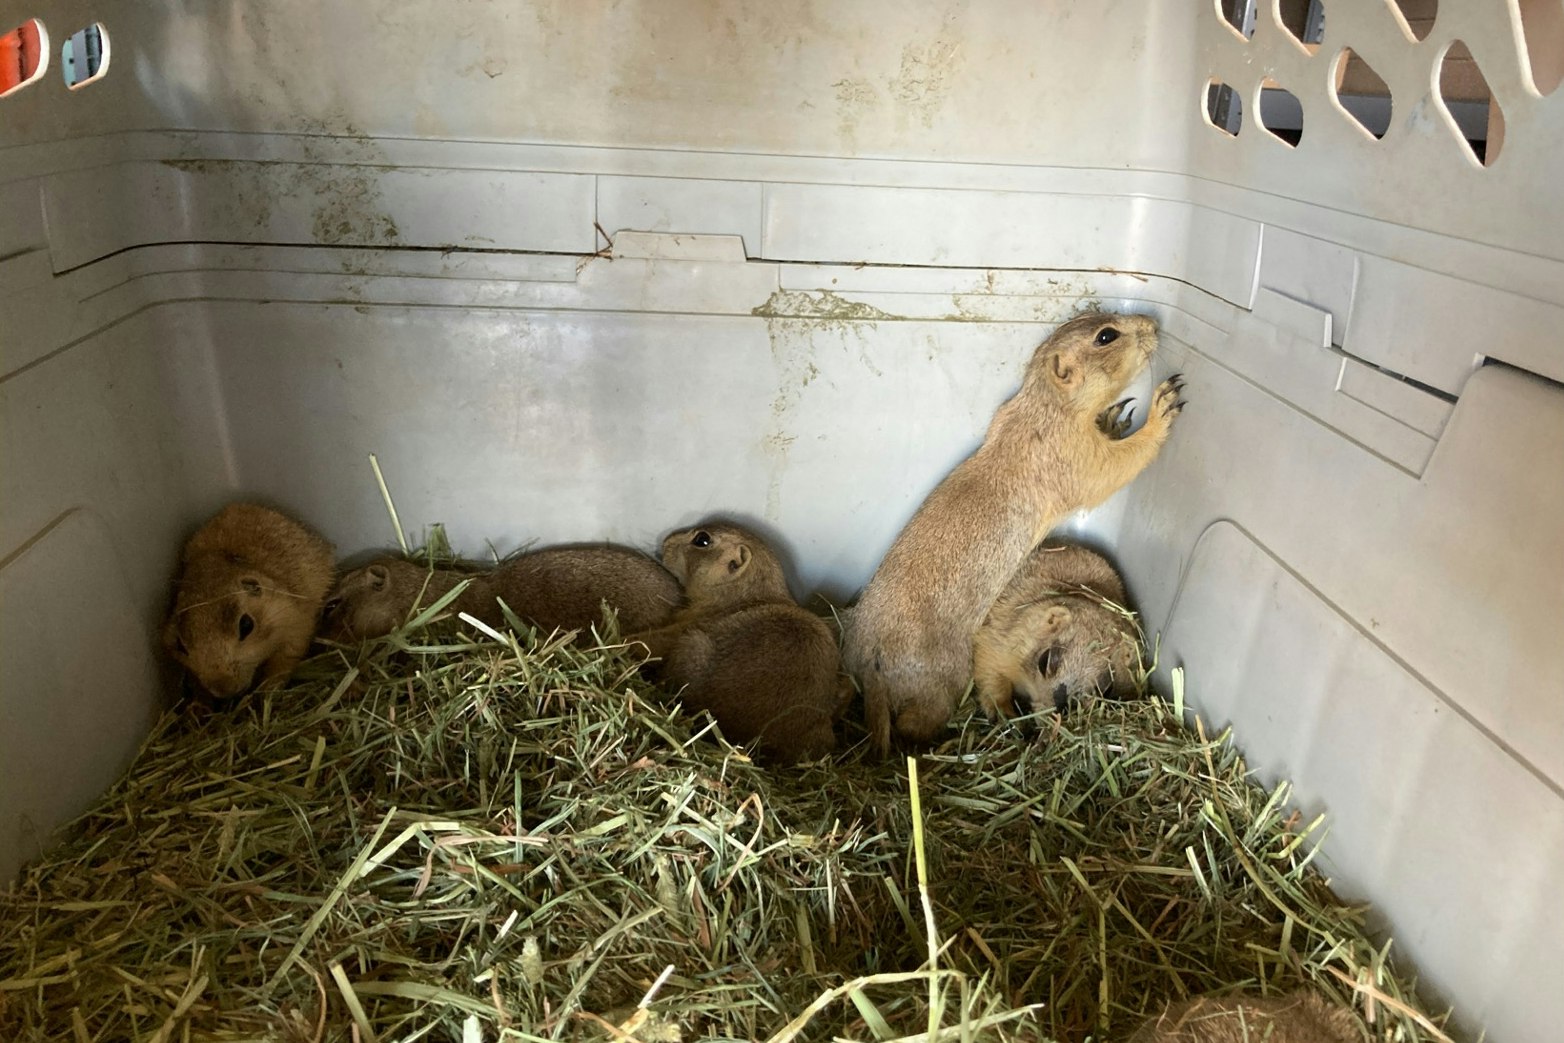 In a plastic animal carrier, a dozen prairie dogs nestle among hay